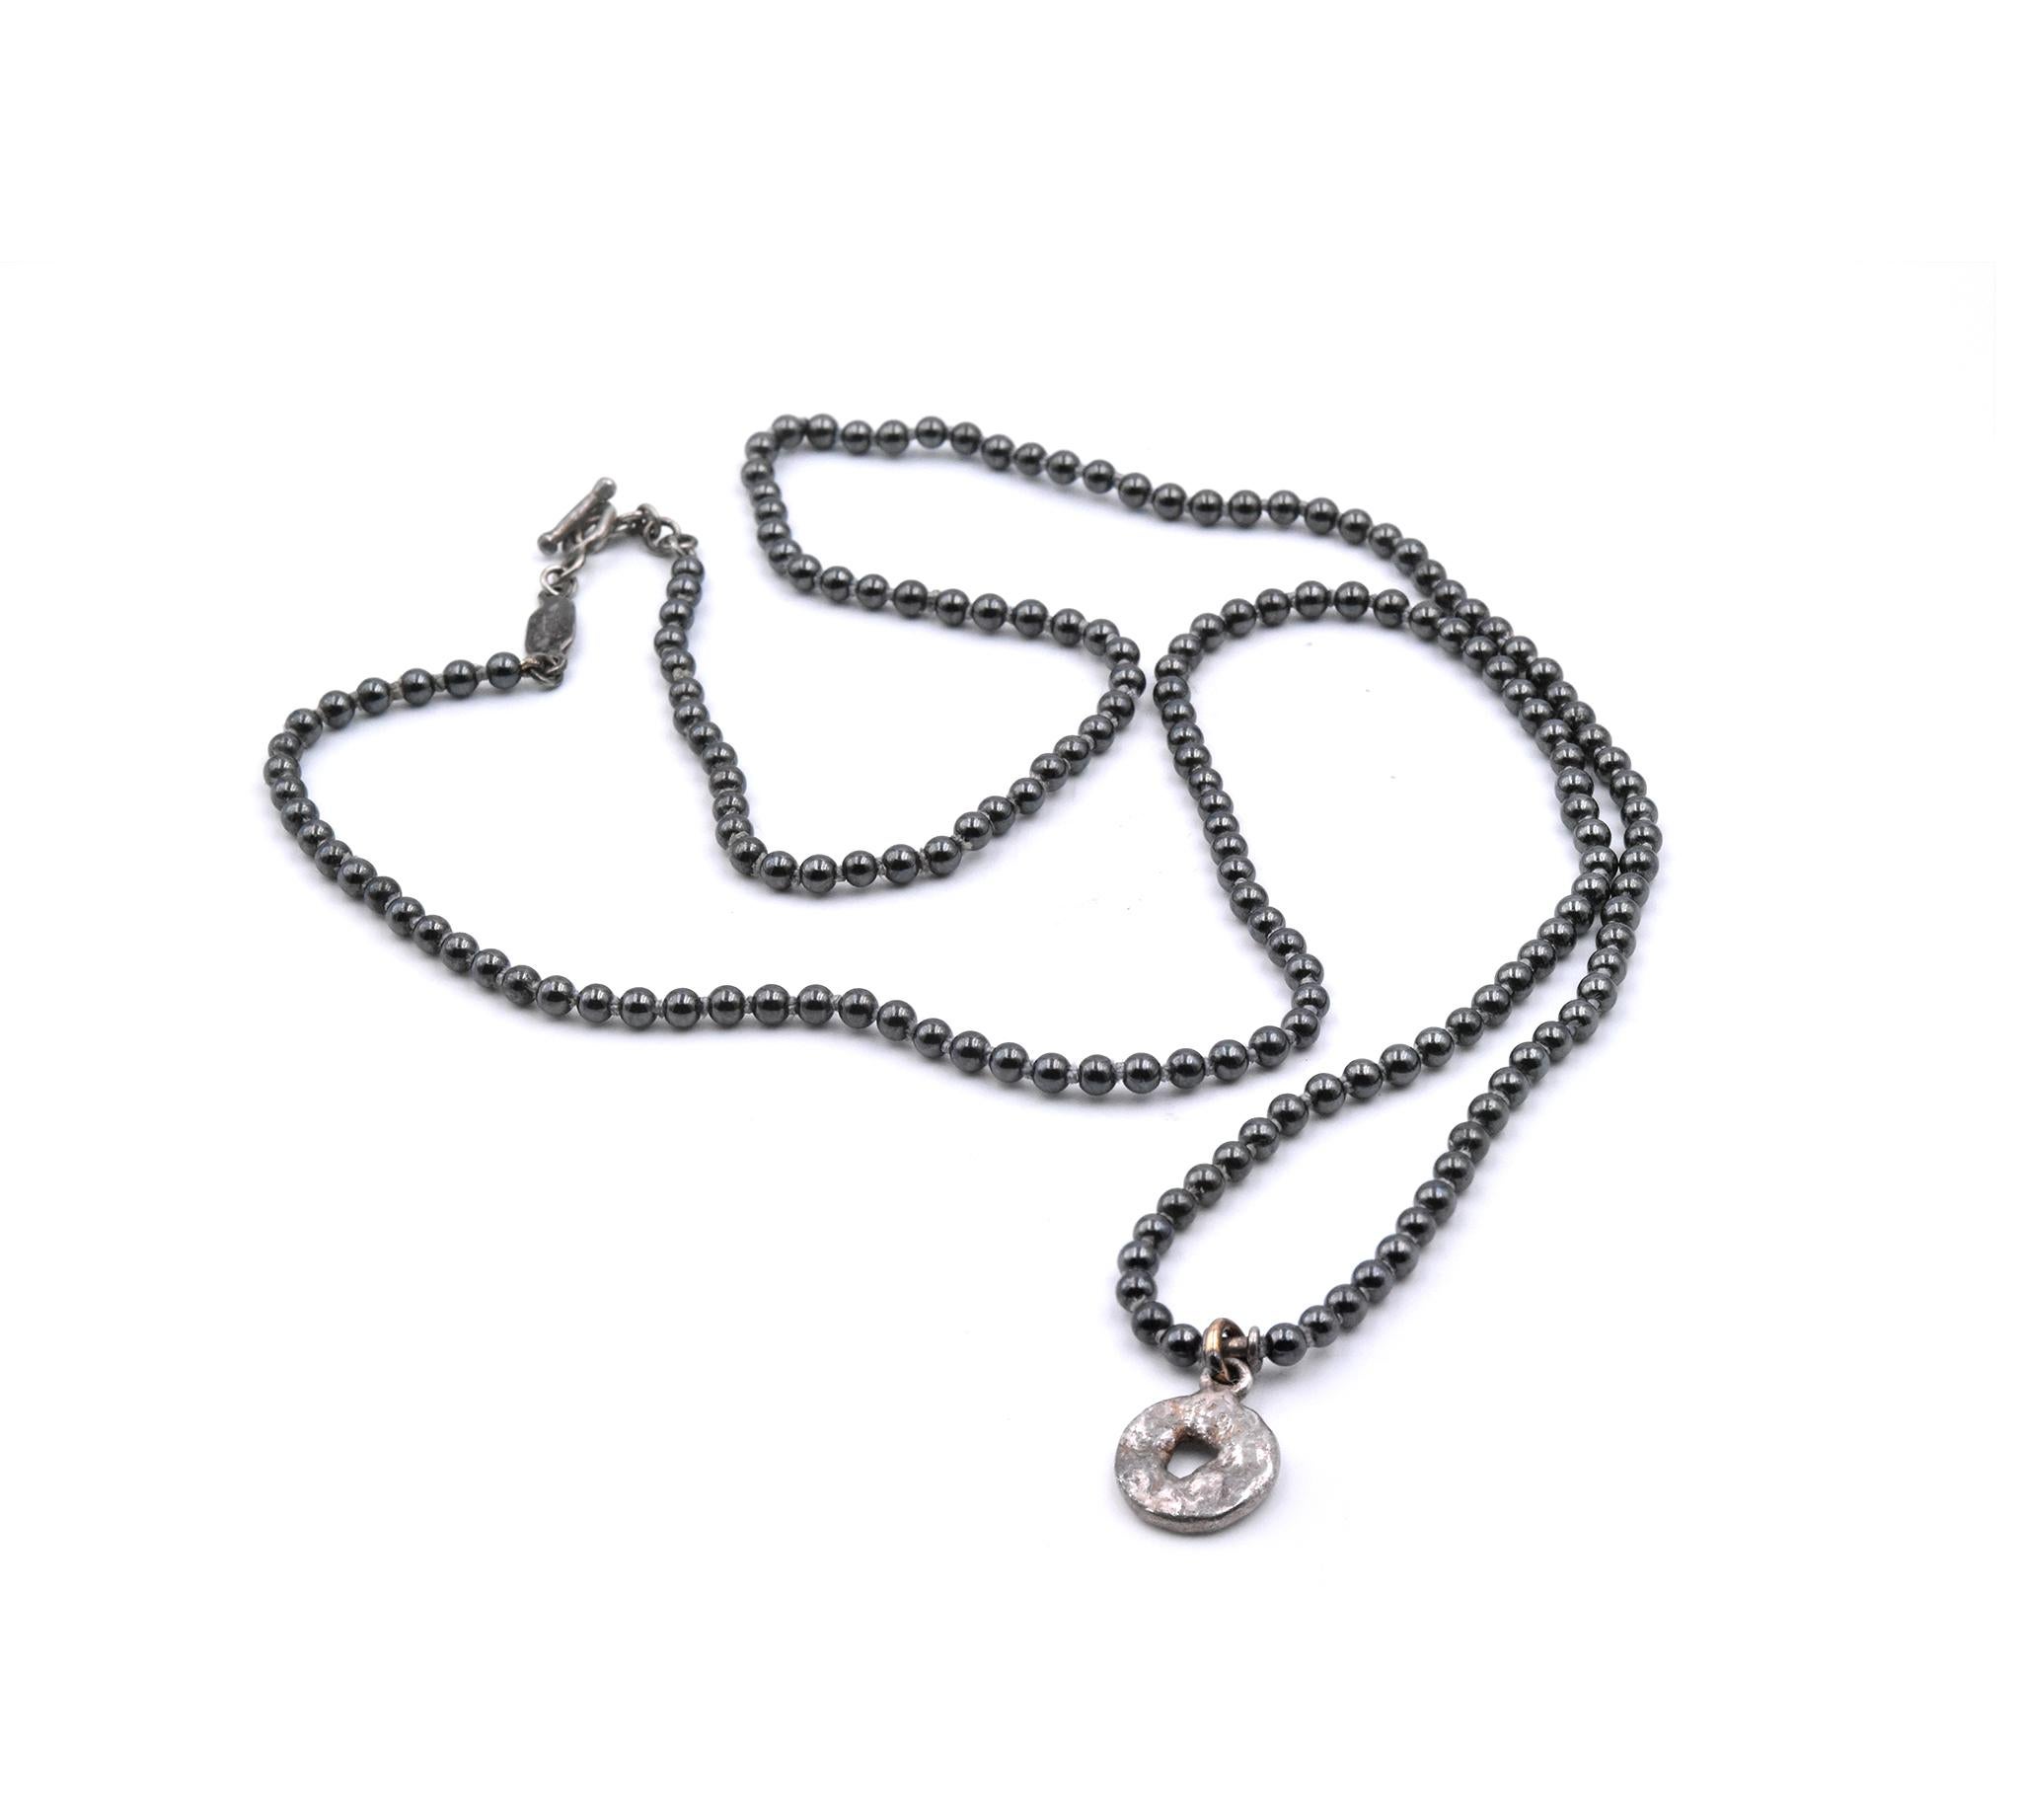 Designer: Lee Brevard
Material: sterling silver 
Dimensions: necklace measures 30-inches in length
Weight: 21.57 grams
